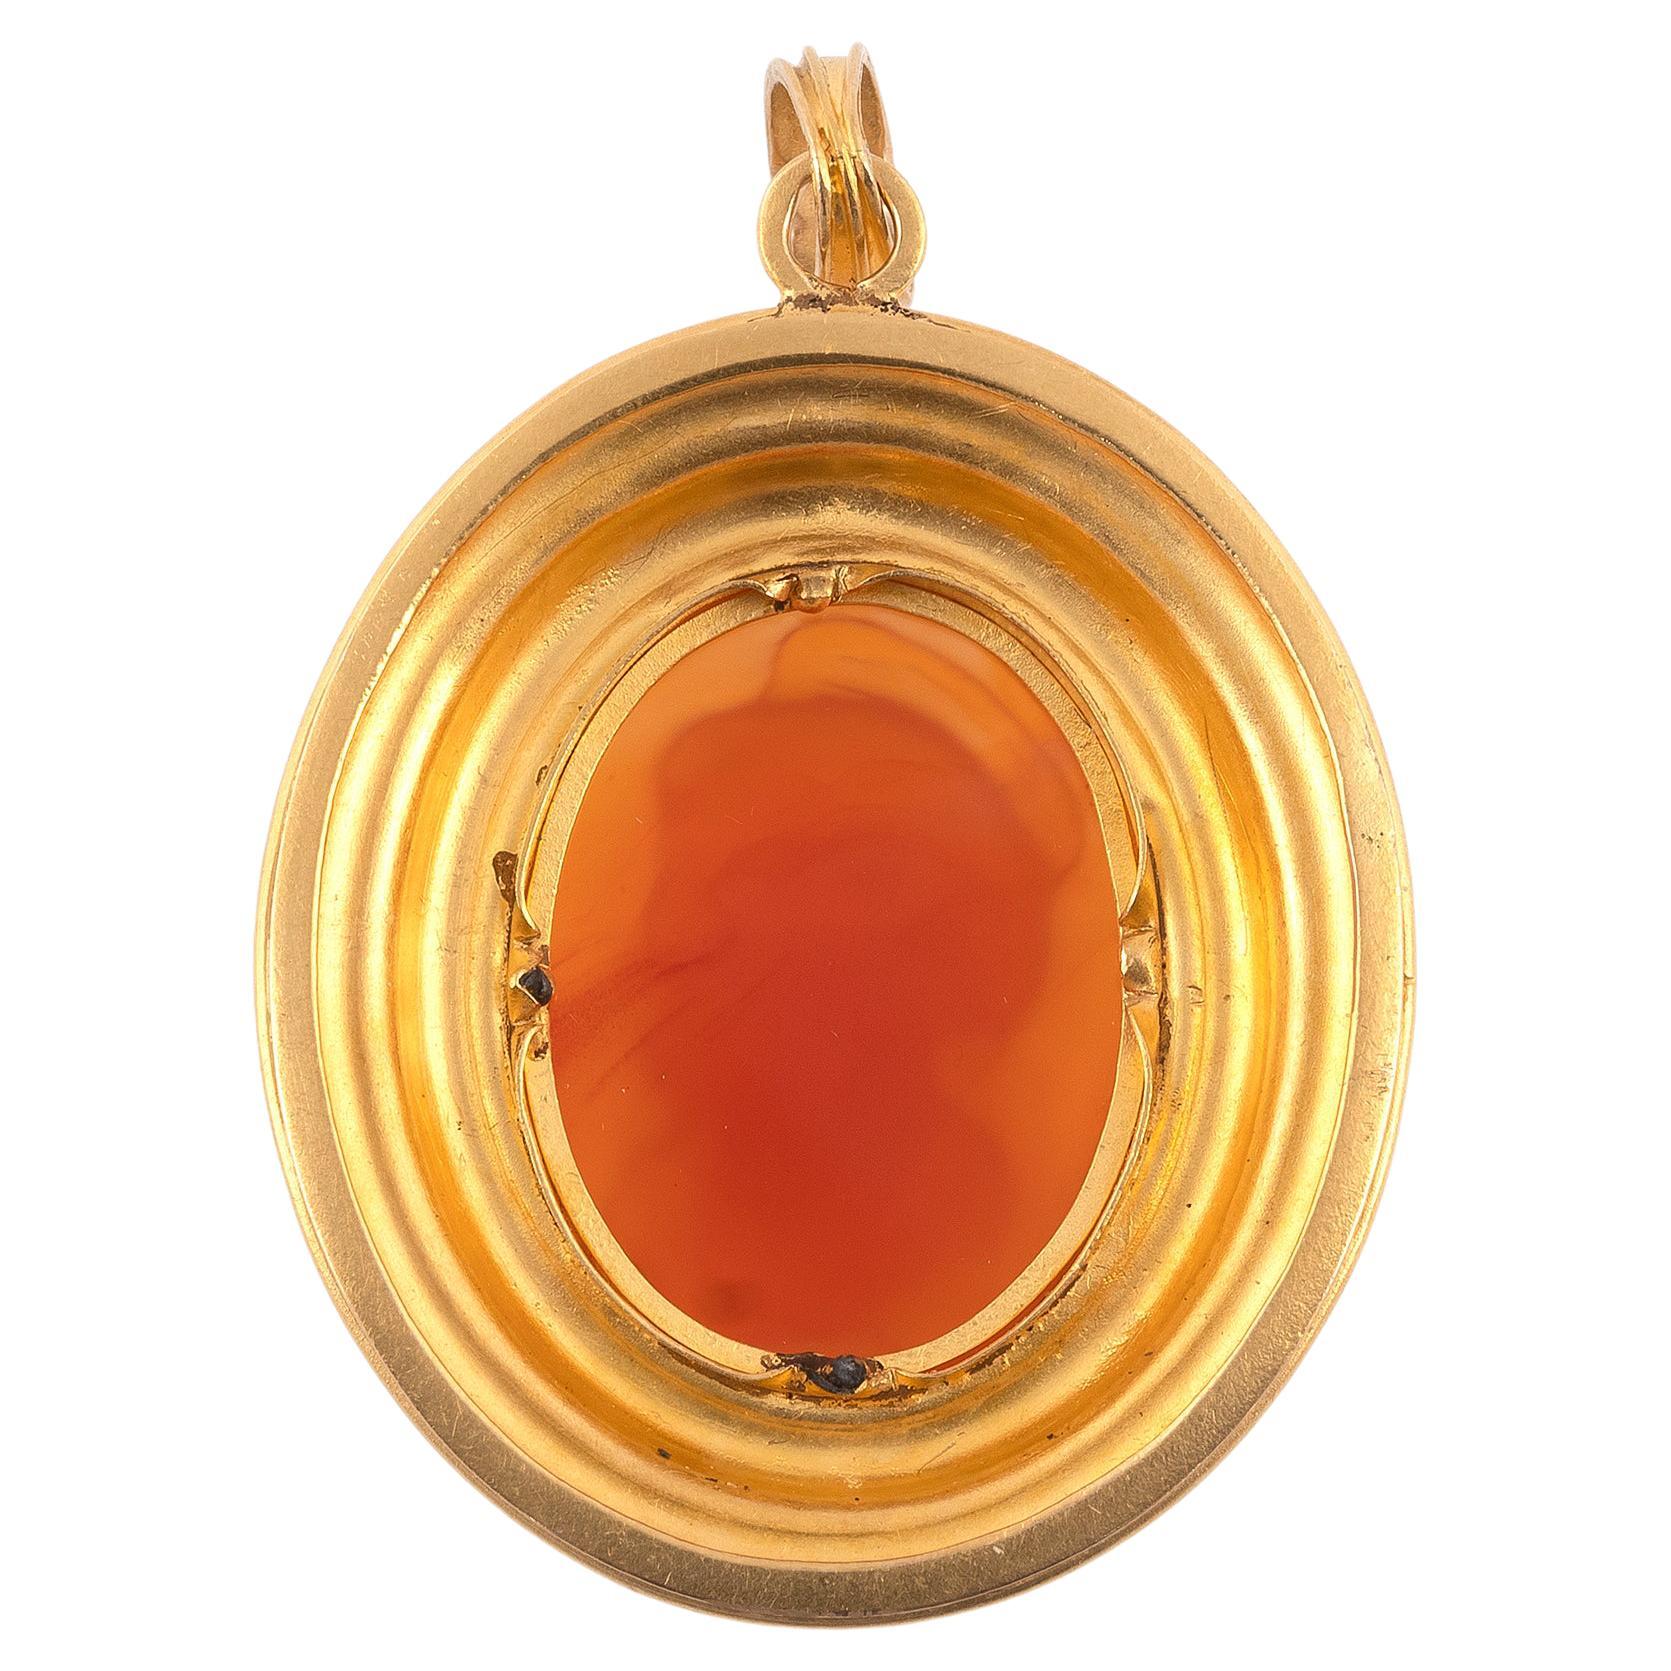 A carnelian cameo representing Saint Peter in profile in a yellow gold 750 pendant setting
Height: 4 cm; Total gross weight: 12.25g
In original case with the coat of arms and dated 1842.
